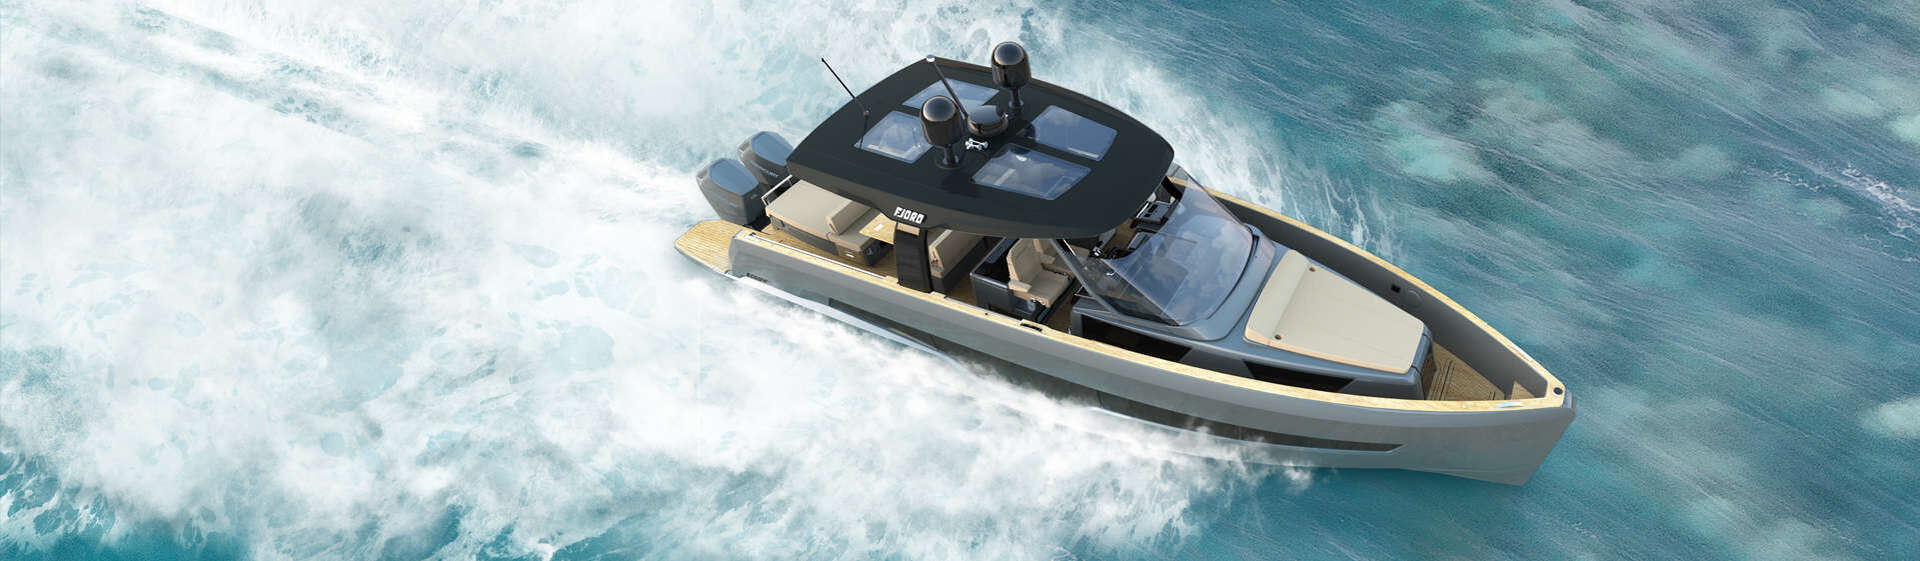 Fjord 41 XP races near coastline with powerful twin v12 600 hp outboard motors